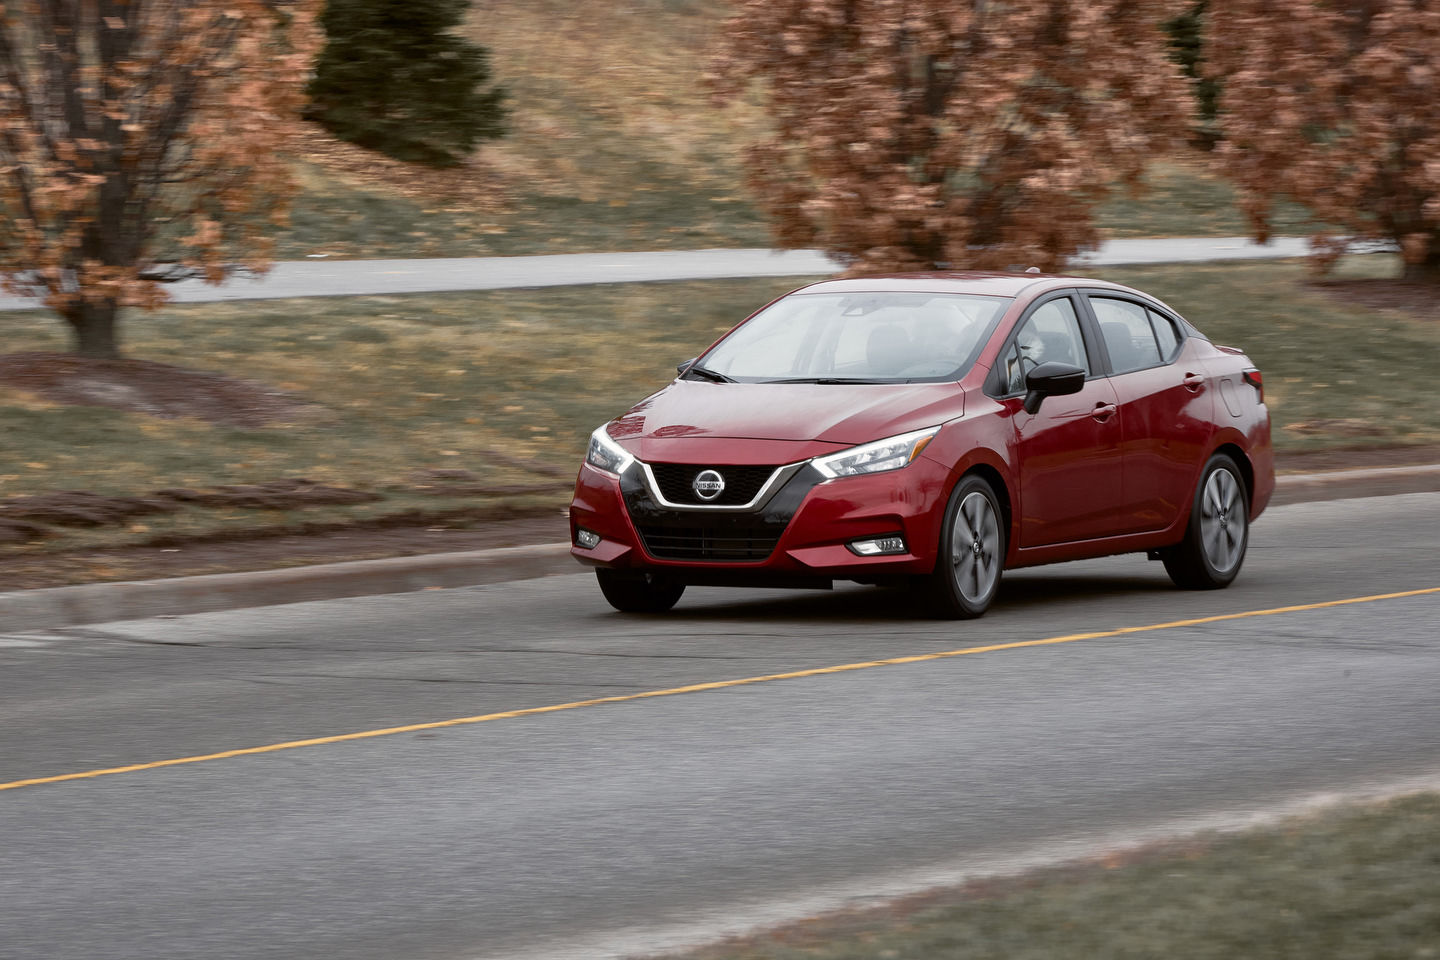 The best pre-owned Nissan vehicles to save fuel